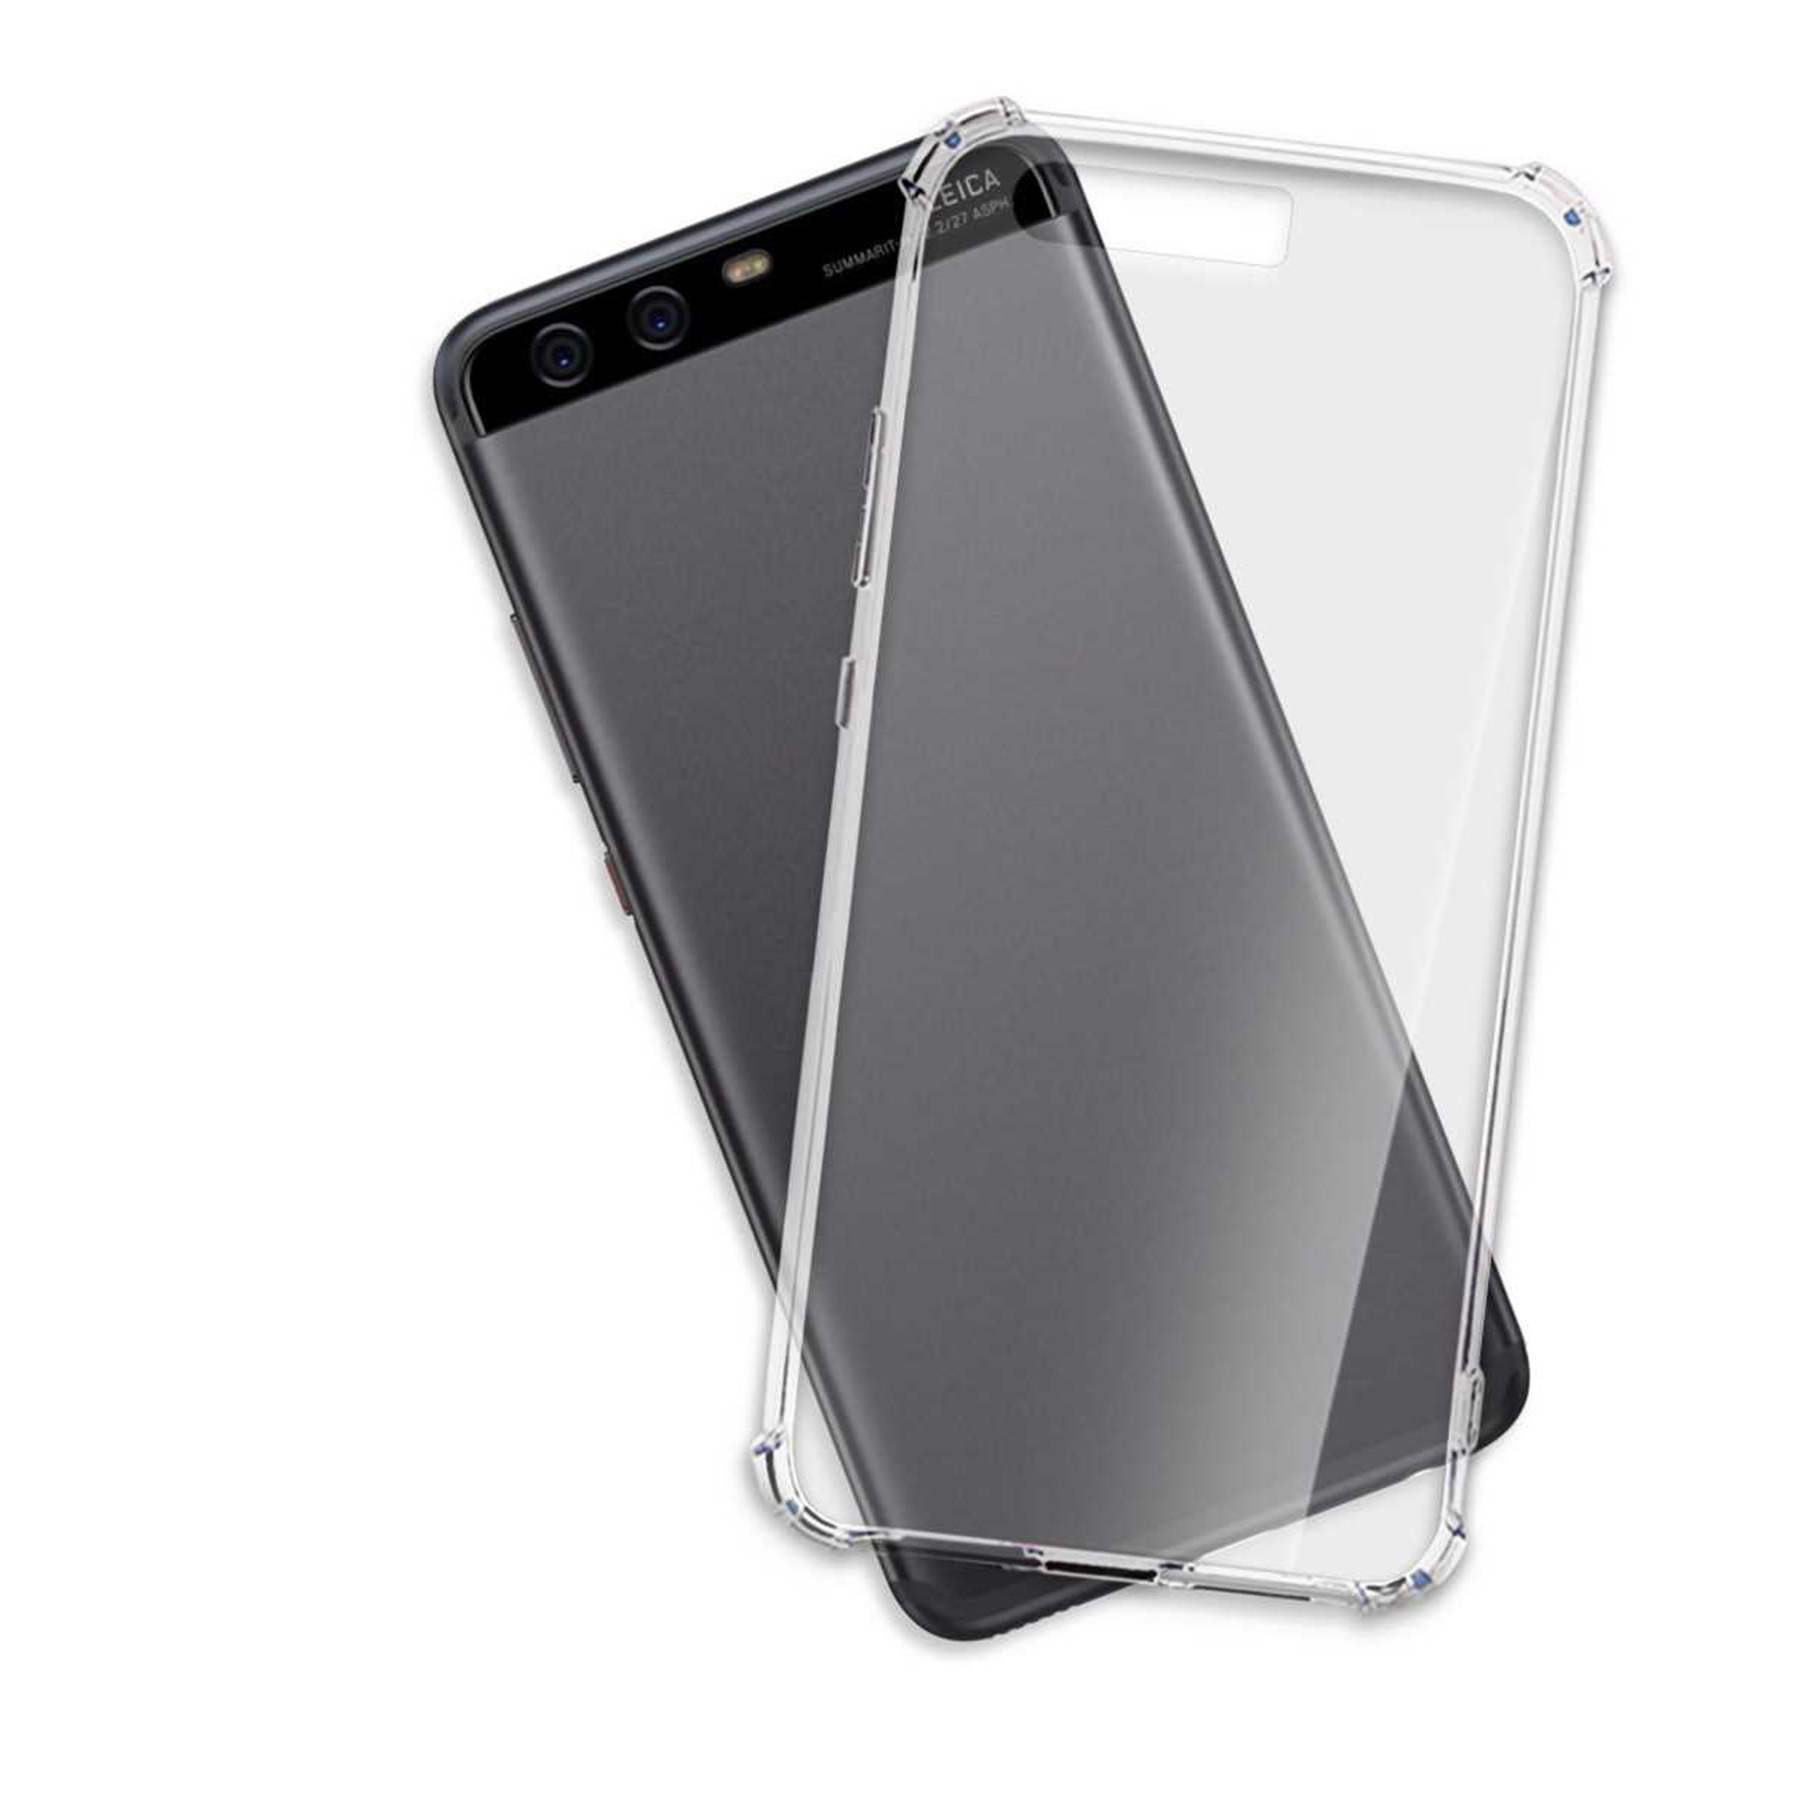 Case, ENERGY Huawei, Transparent Clear P10, MTB MORE Backcover, Armor